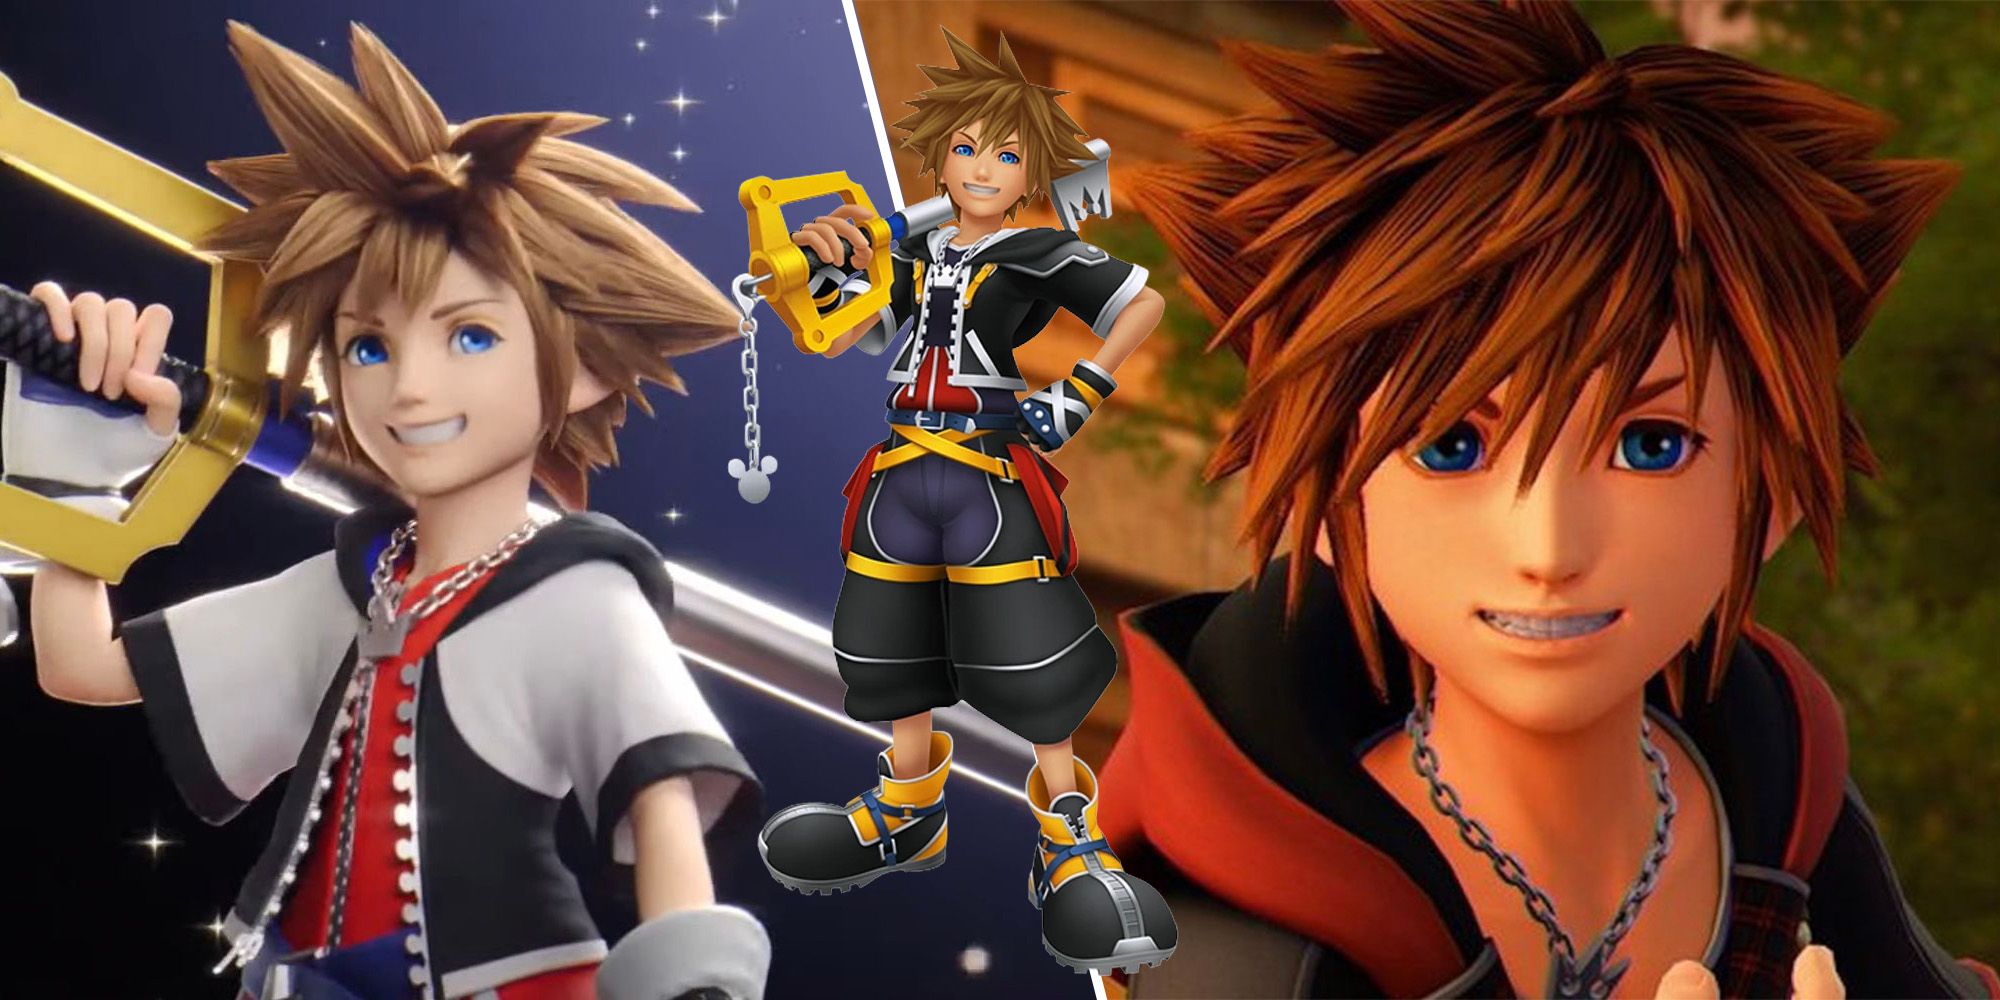 kingdom hearts sora smash sora with his kingdom hearts 1 outfits, and sora from kh2 and kh3